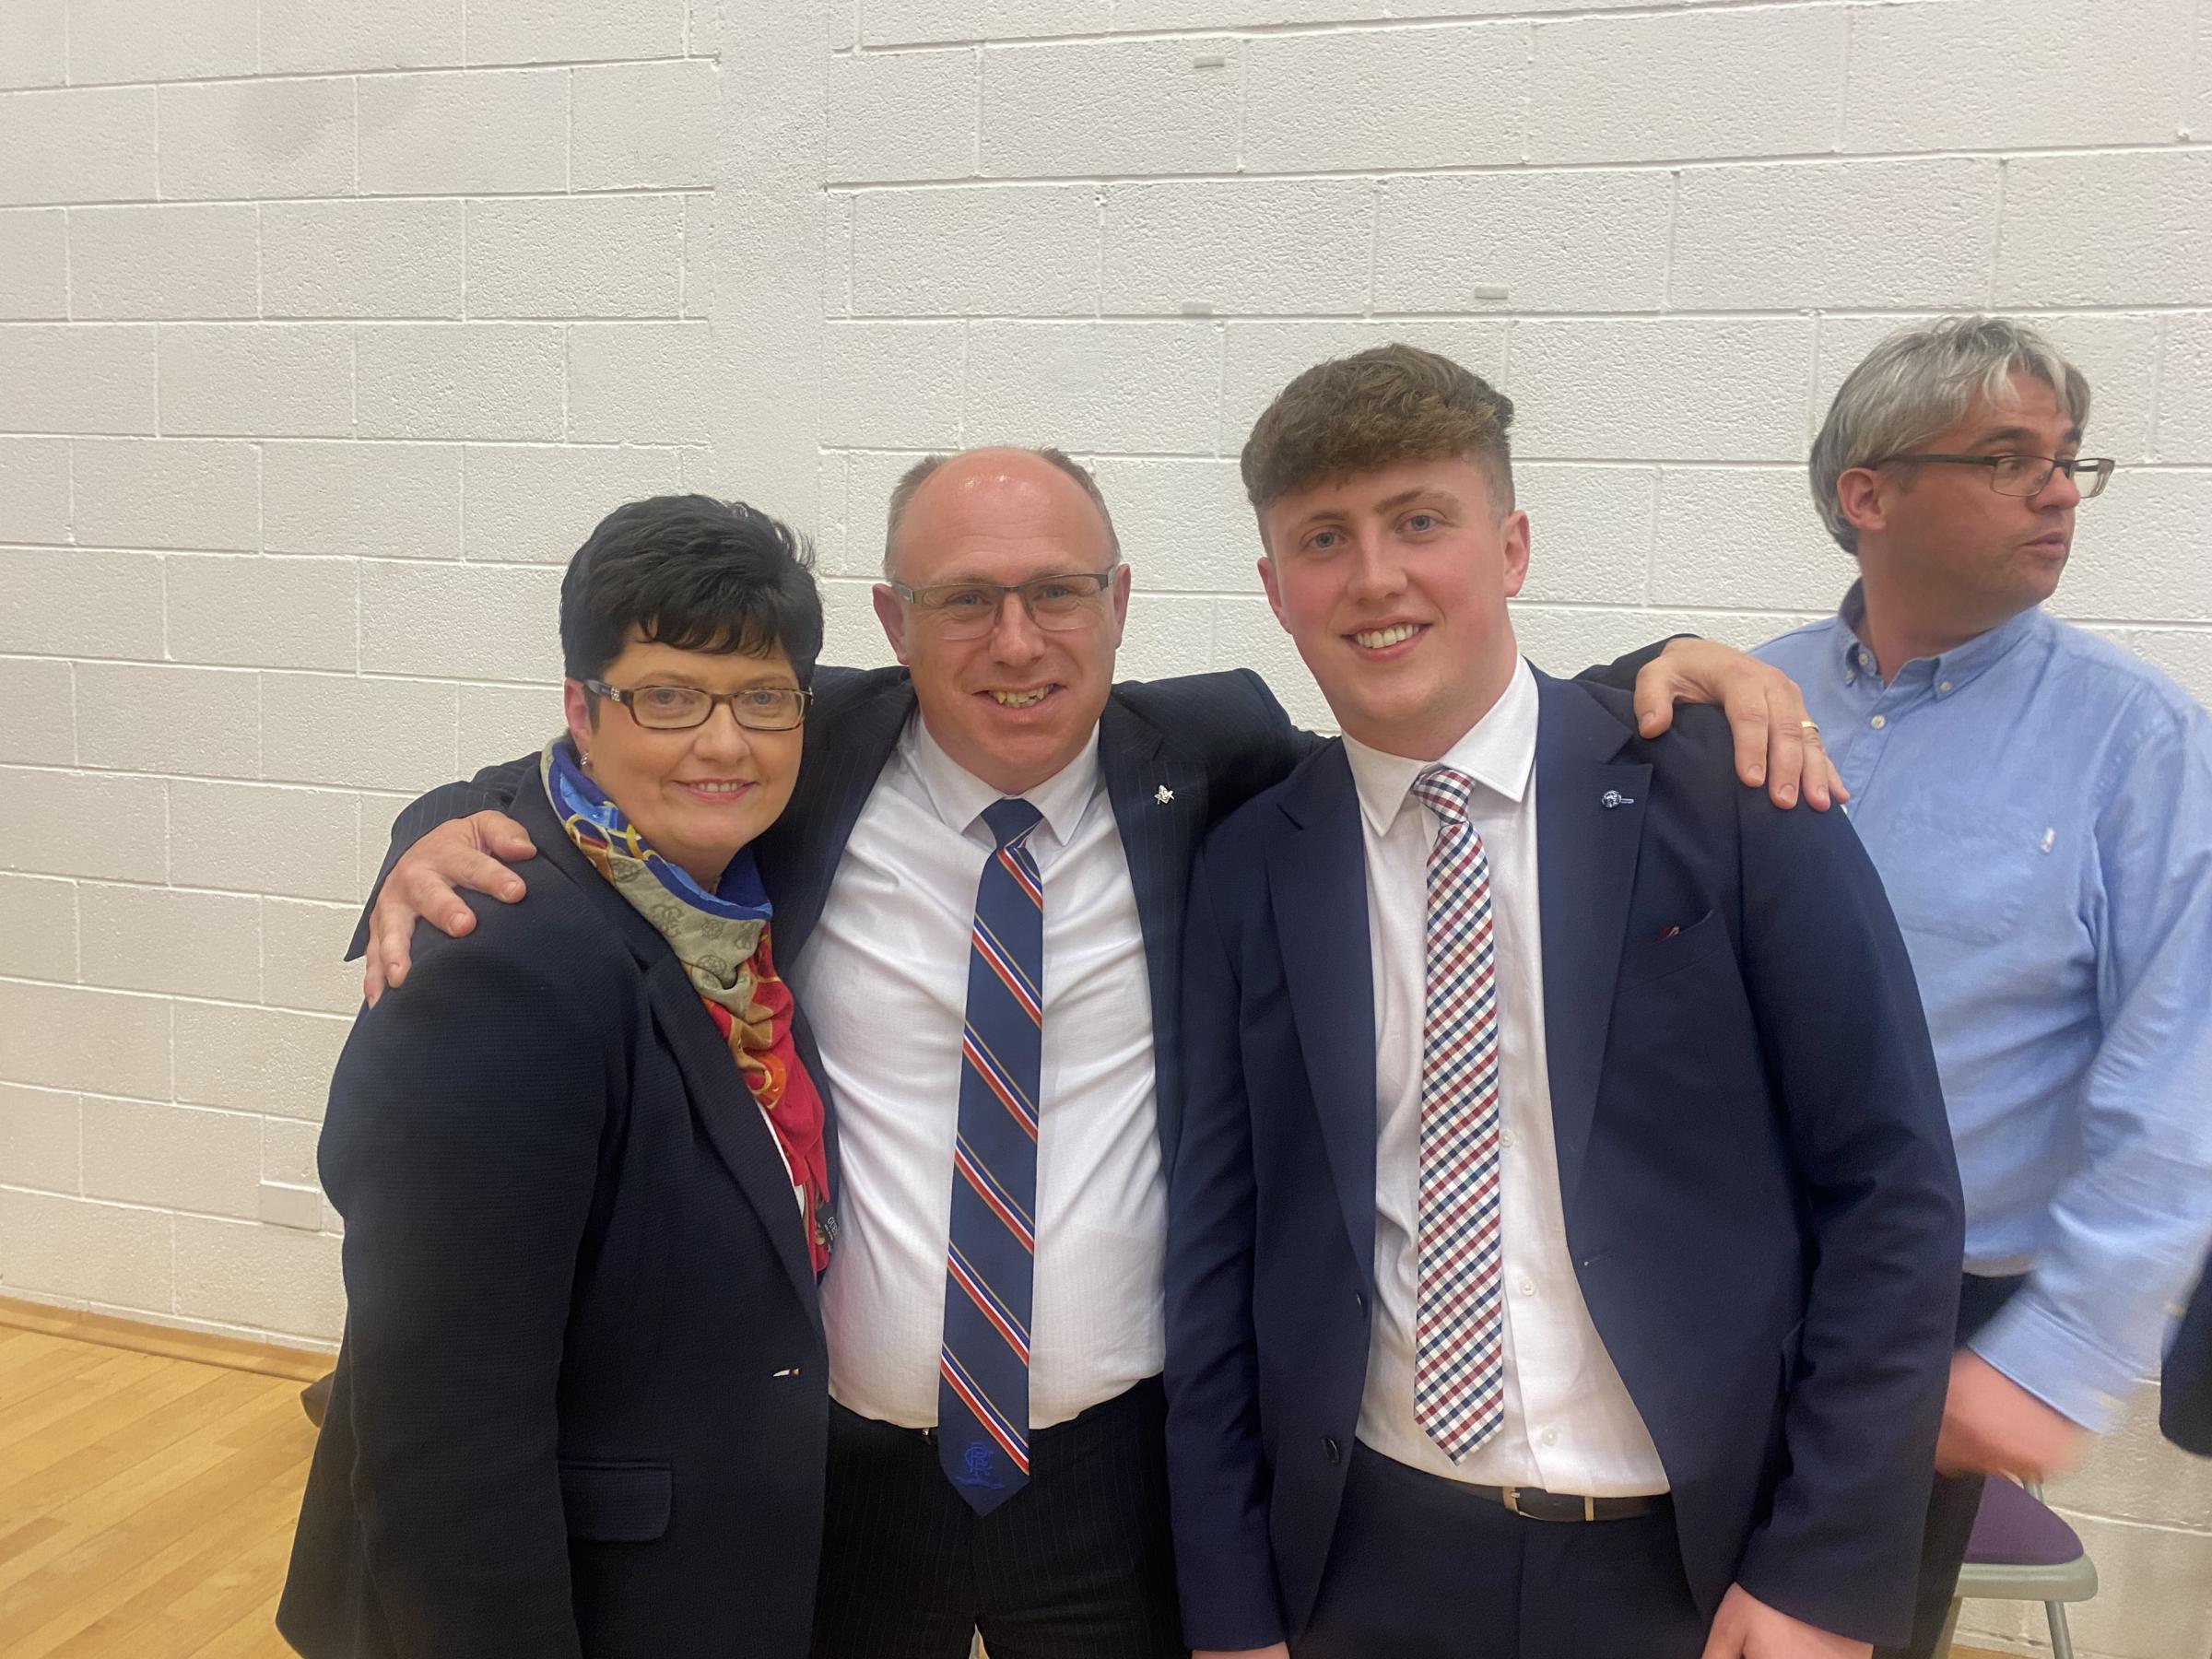 Roy Crawford is congratulated on his election by wife Carole and son Mark.